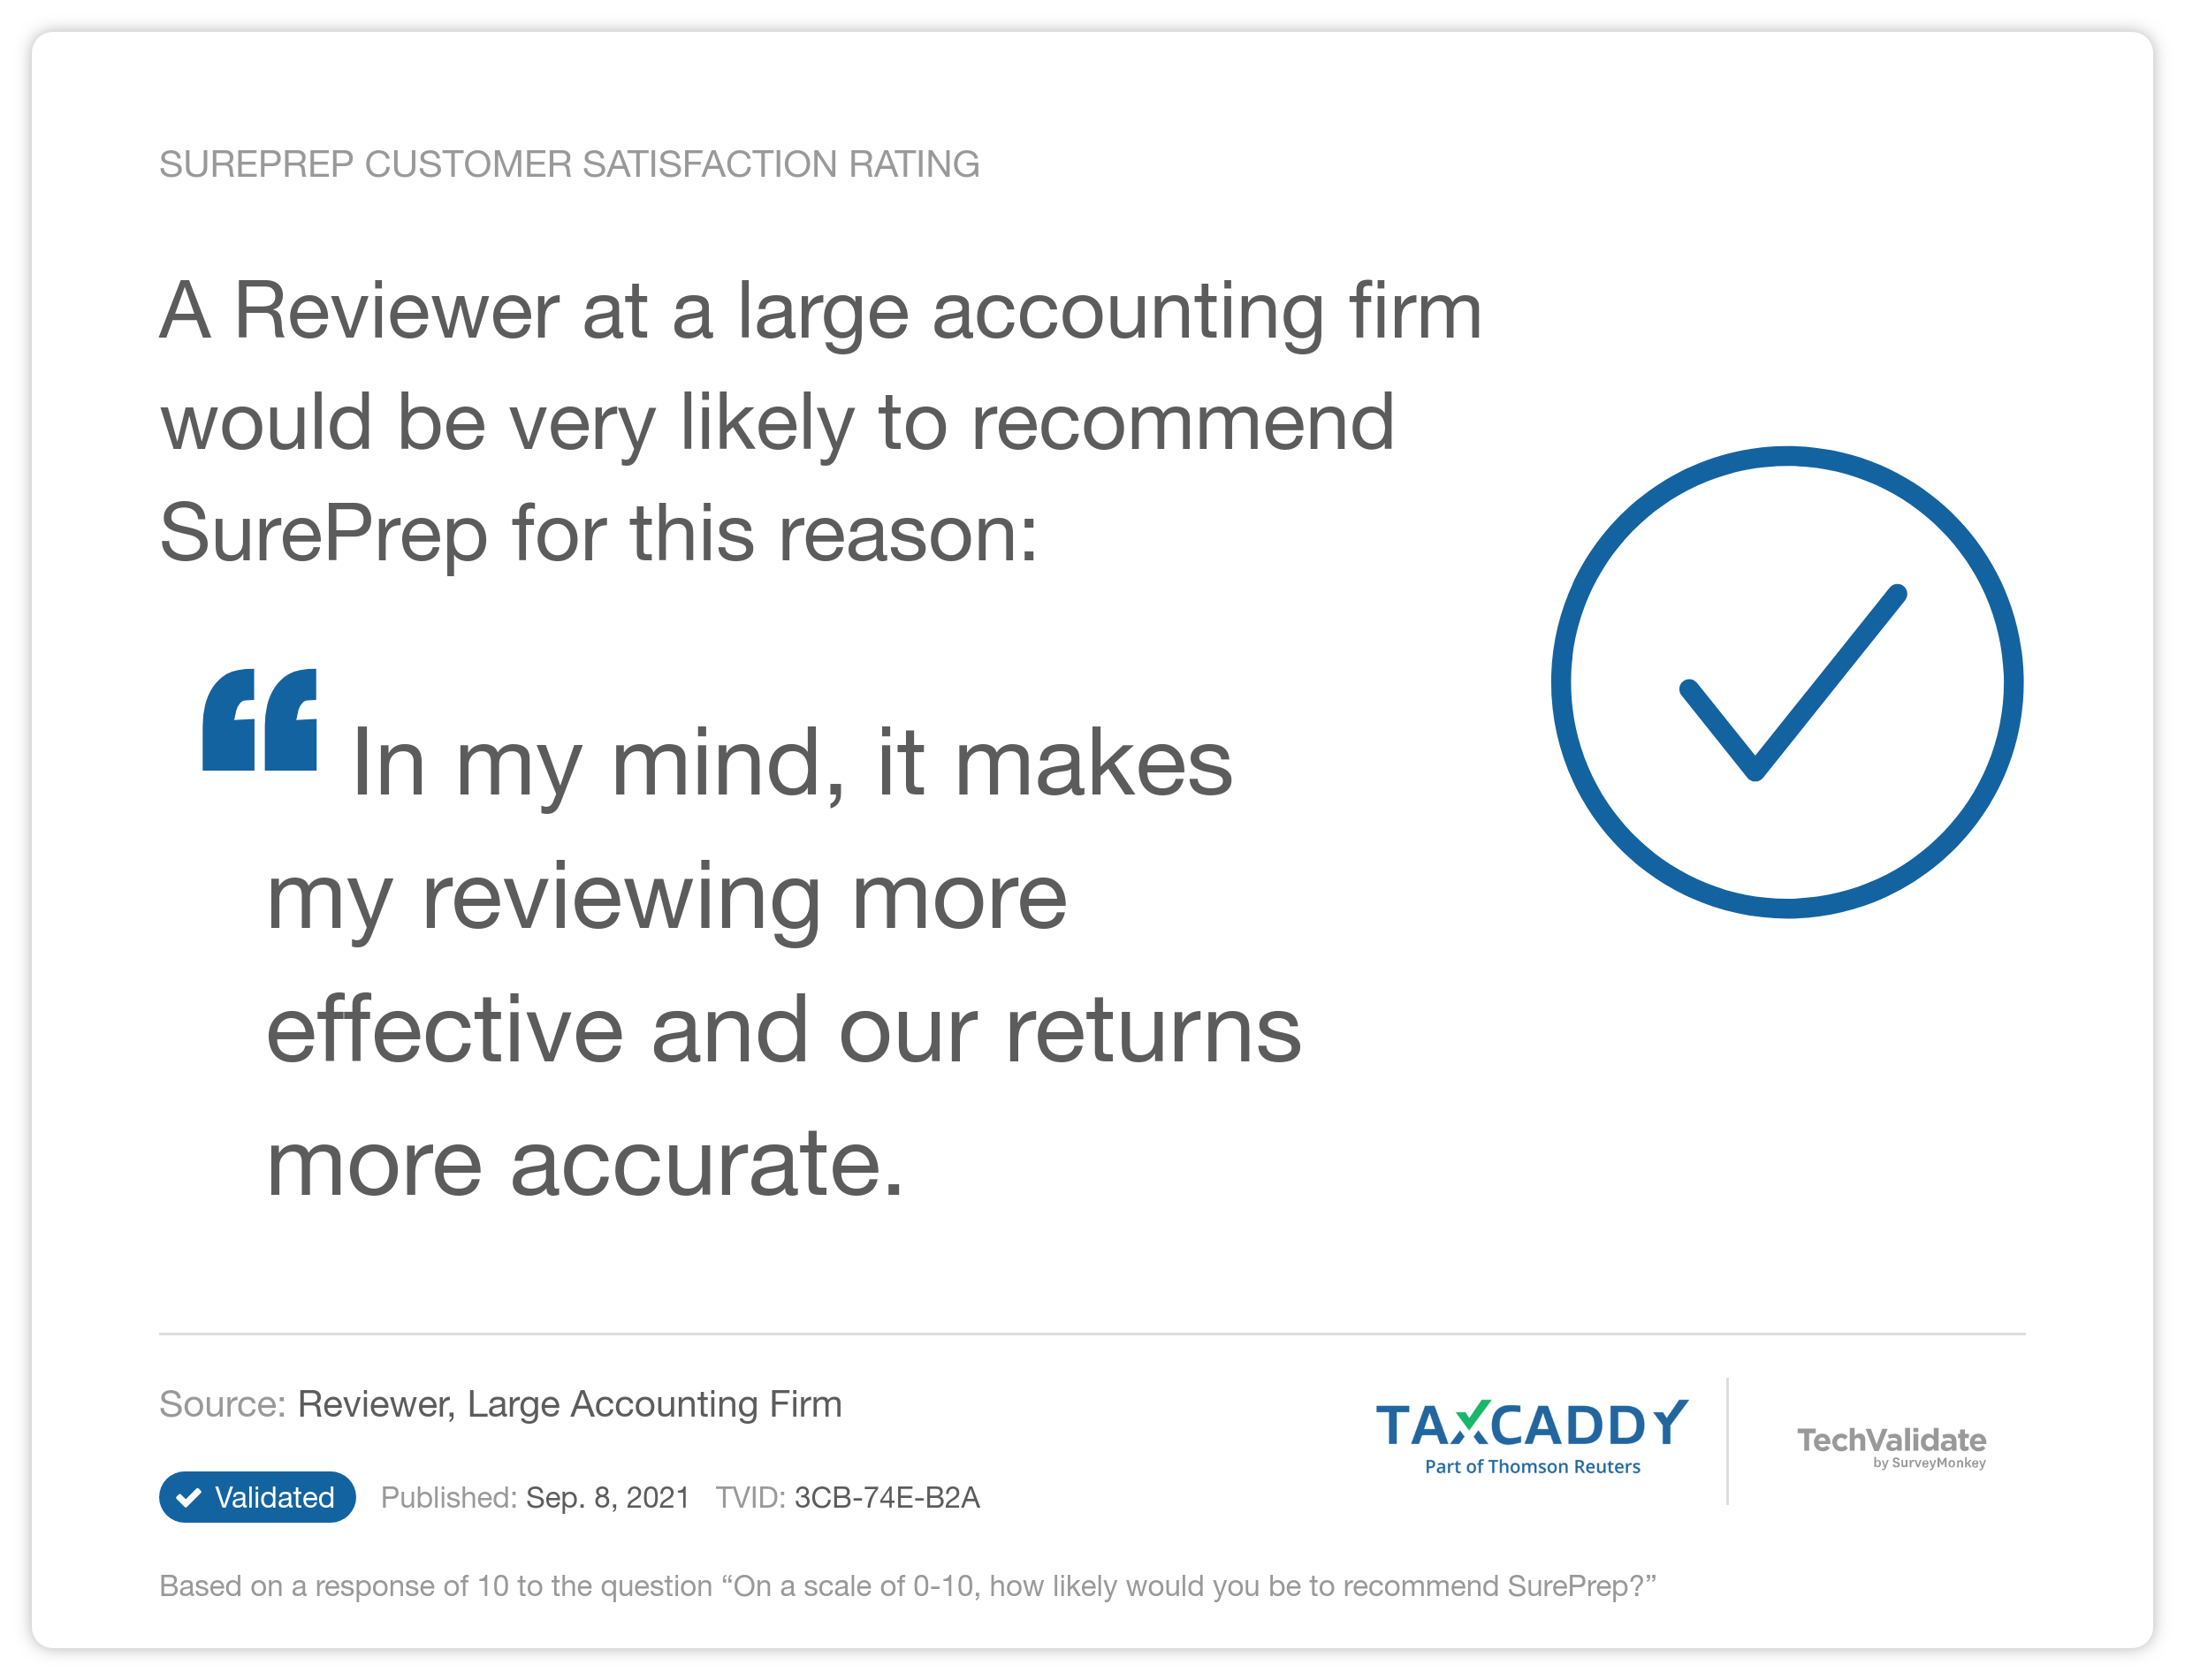 A Reviewer at a large accounting firm would be very likely to recommend SurePrep for this reason: "In my mind, it makes my reviewing more effective and our returns more accurate."